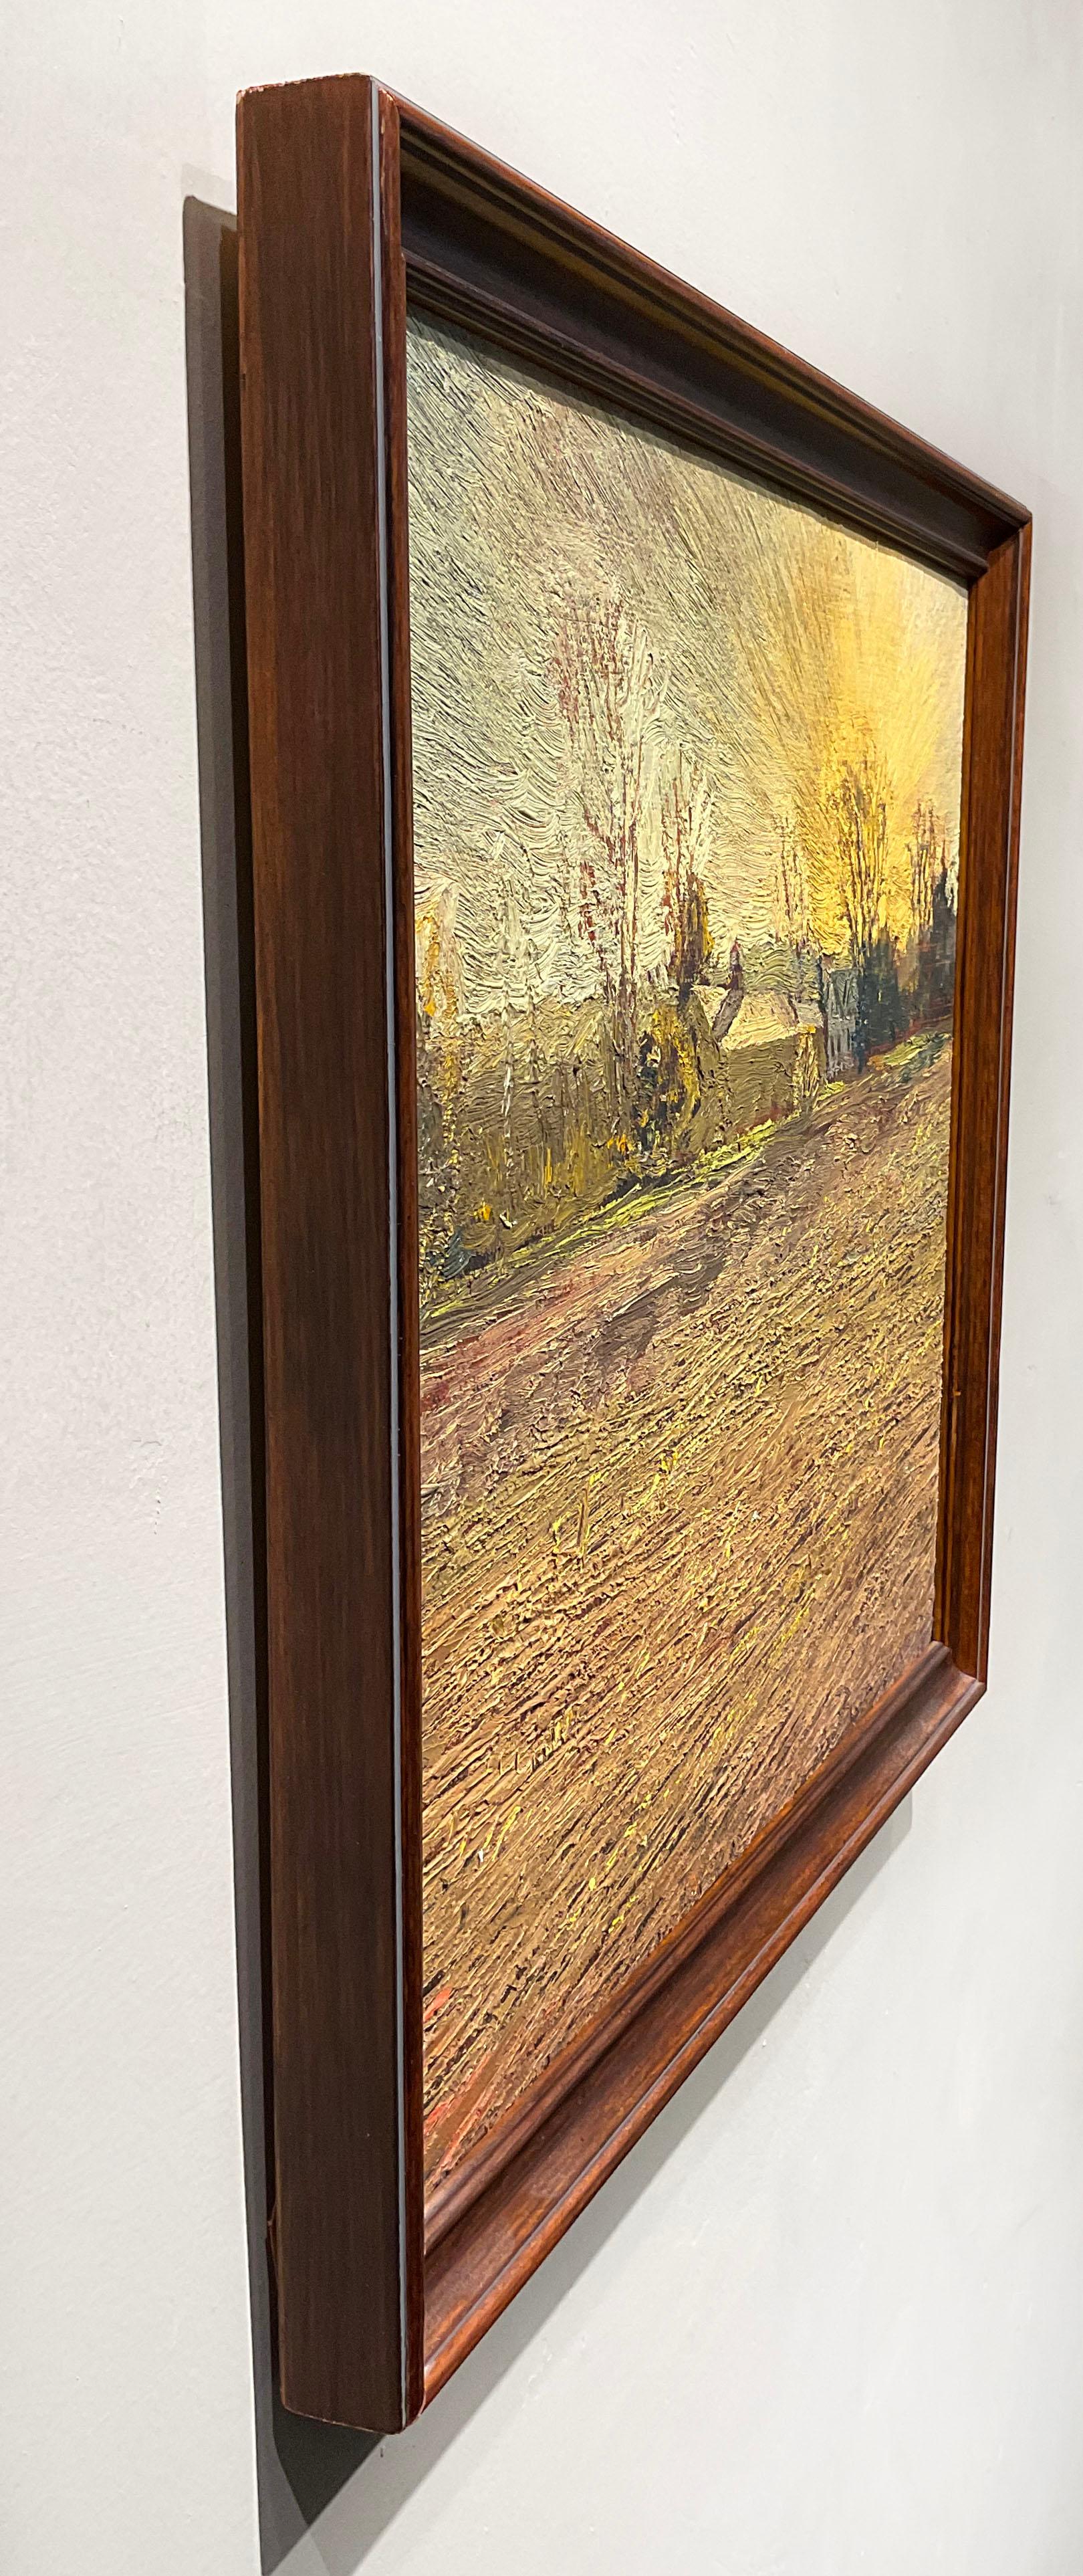 Impressionist style en plein air landscape painting on linen of a rural country barn with a bright yellow sunset and earth toned plowed farm fields
#3991 Warren's Barn, painted by Harry Orlyk in 2007
oil on linen, brown wood moulding, ready to hang